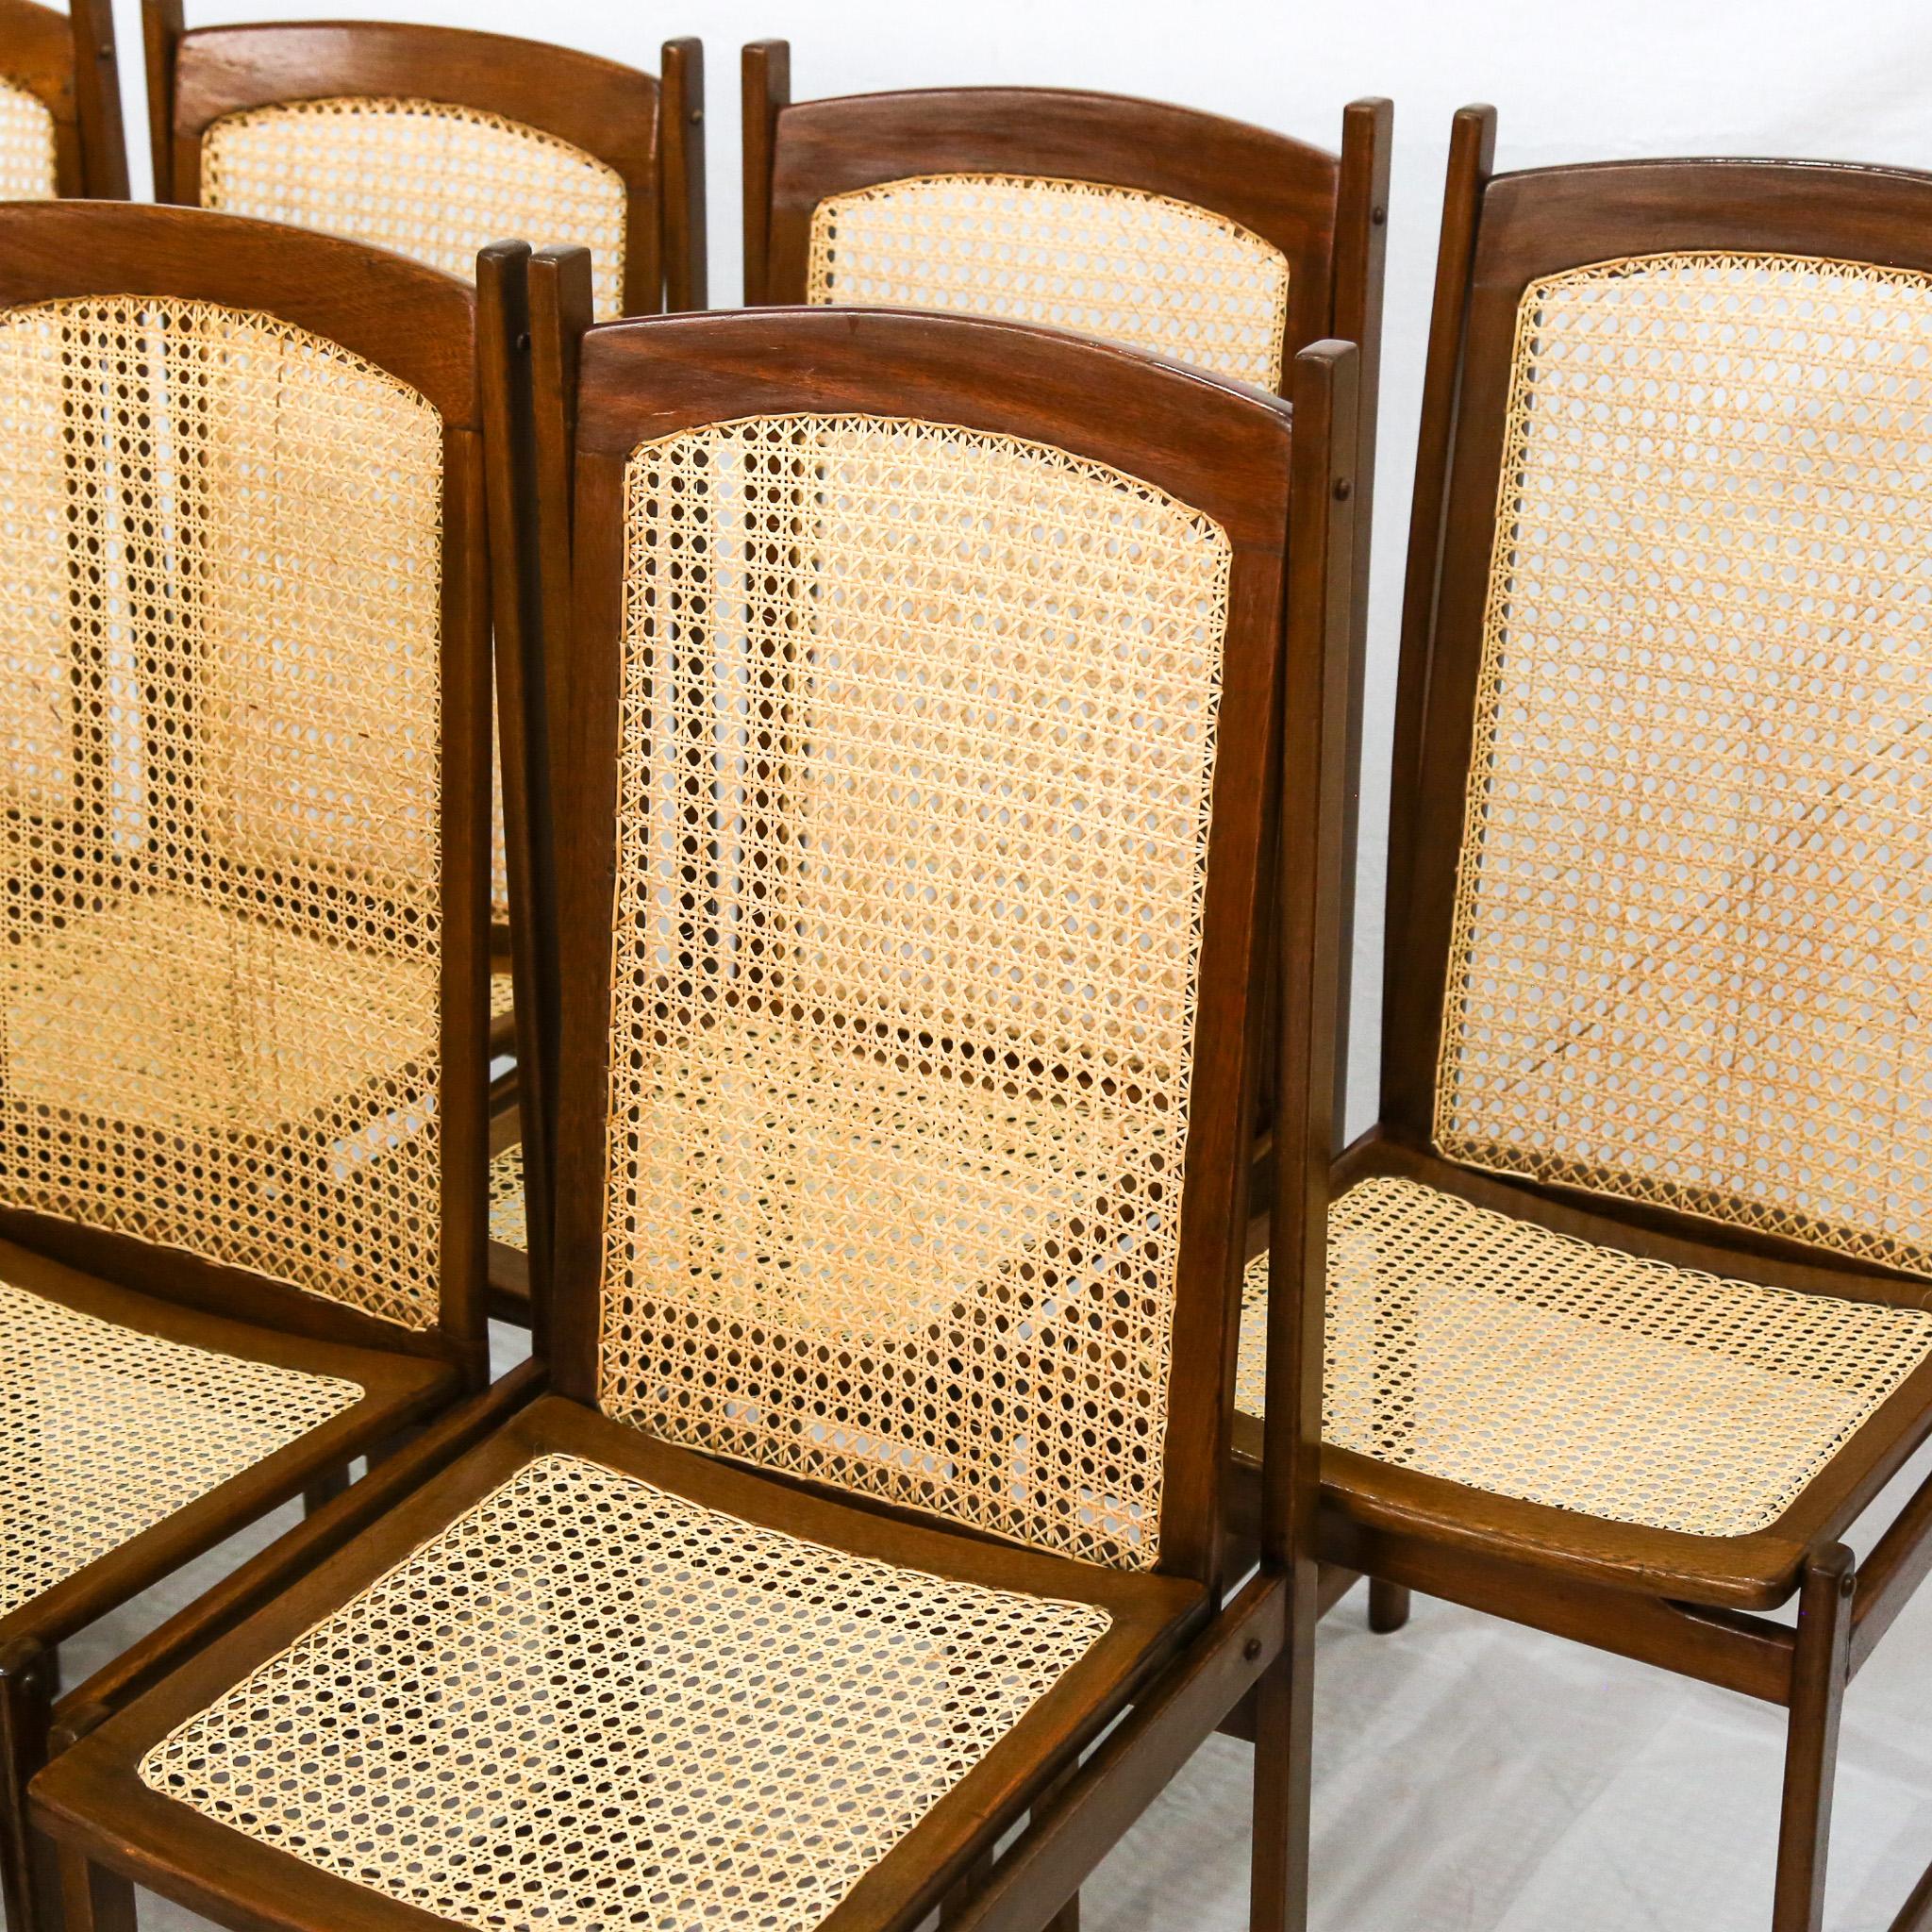 Mid-20th Century Mid-Century Modern Dining Chair Set in Hardwood & Caning, Celina, Brazil, 1960s For Sale